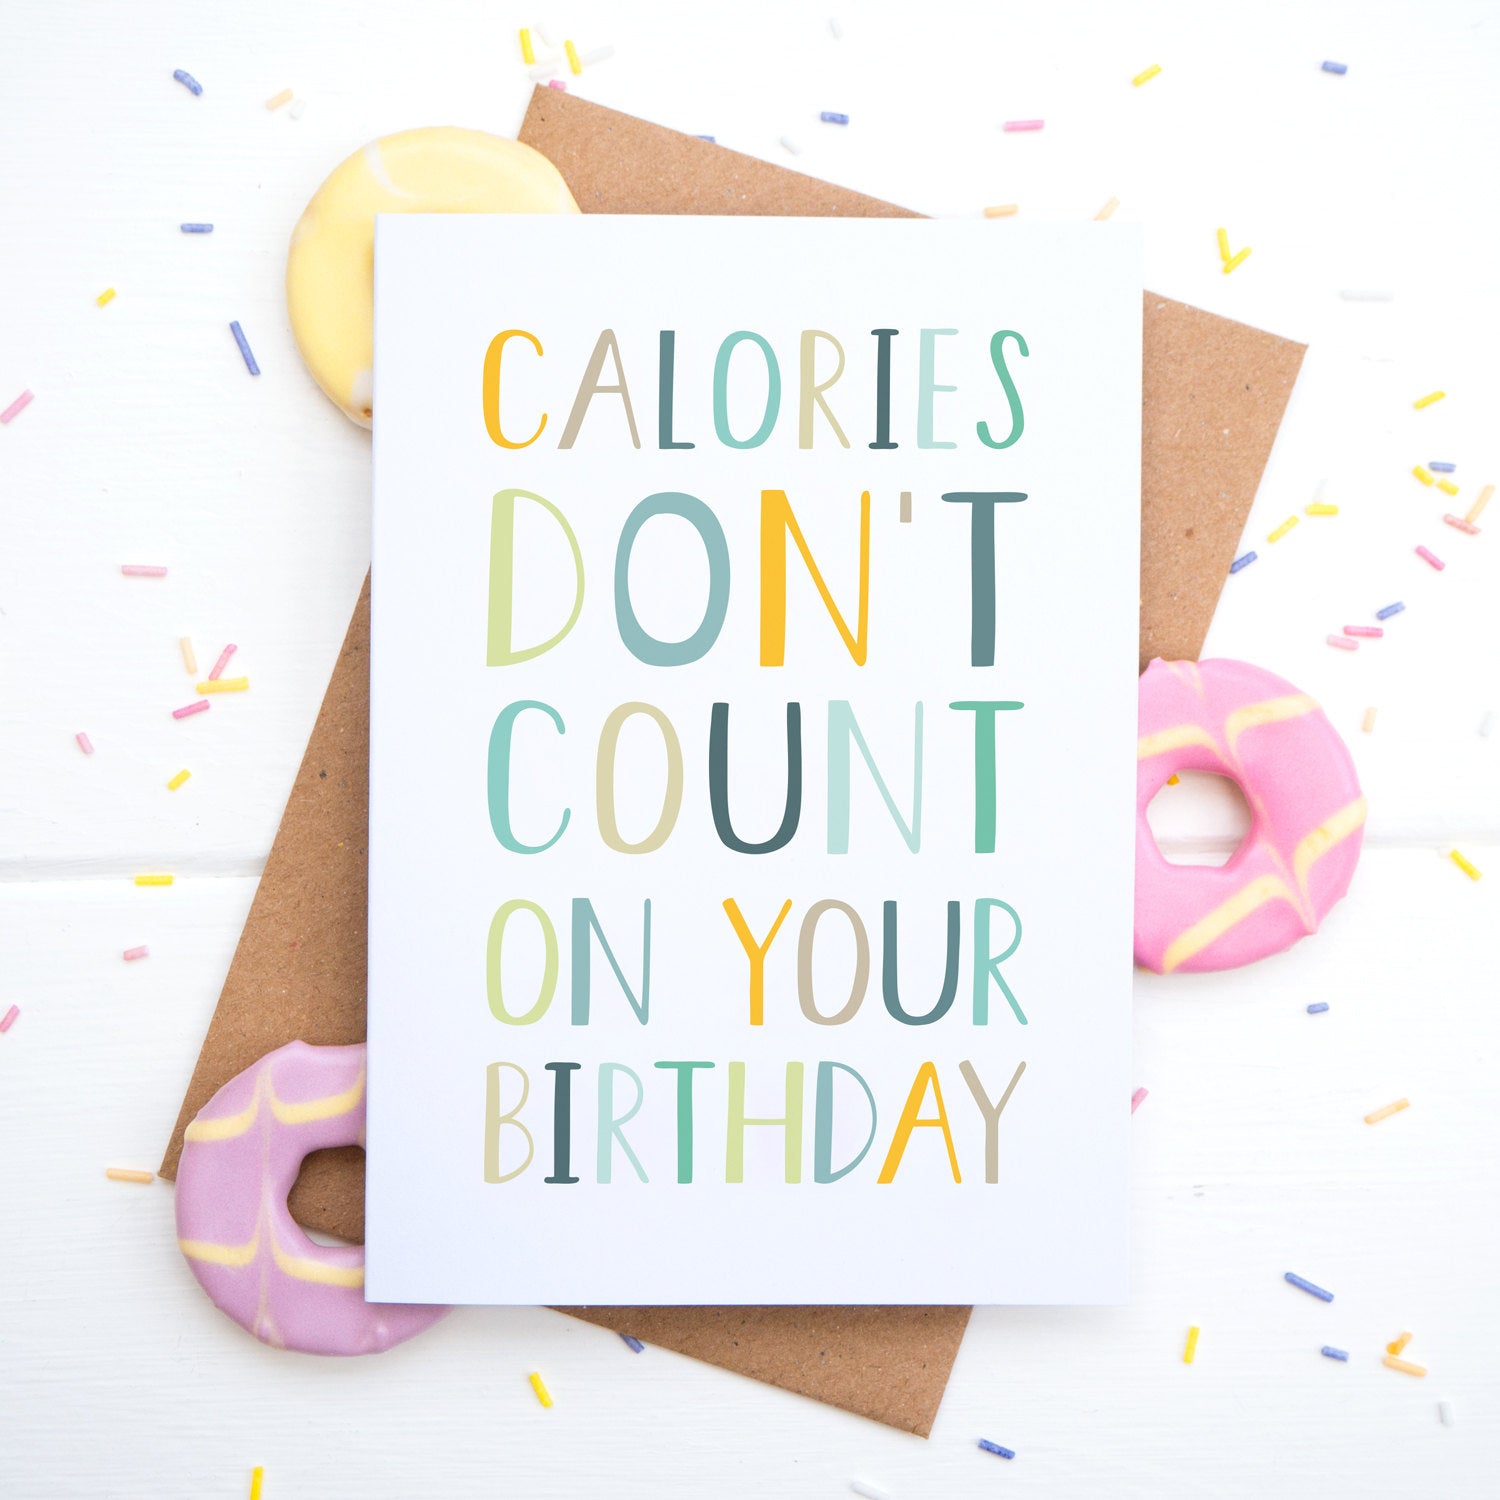 Calories don't count on your birthday in blue